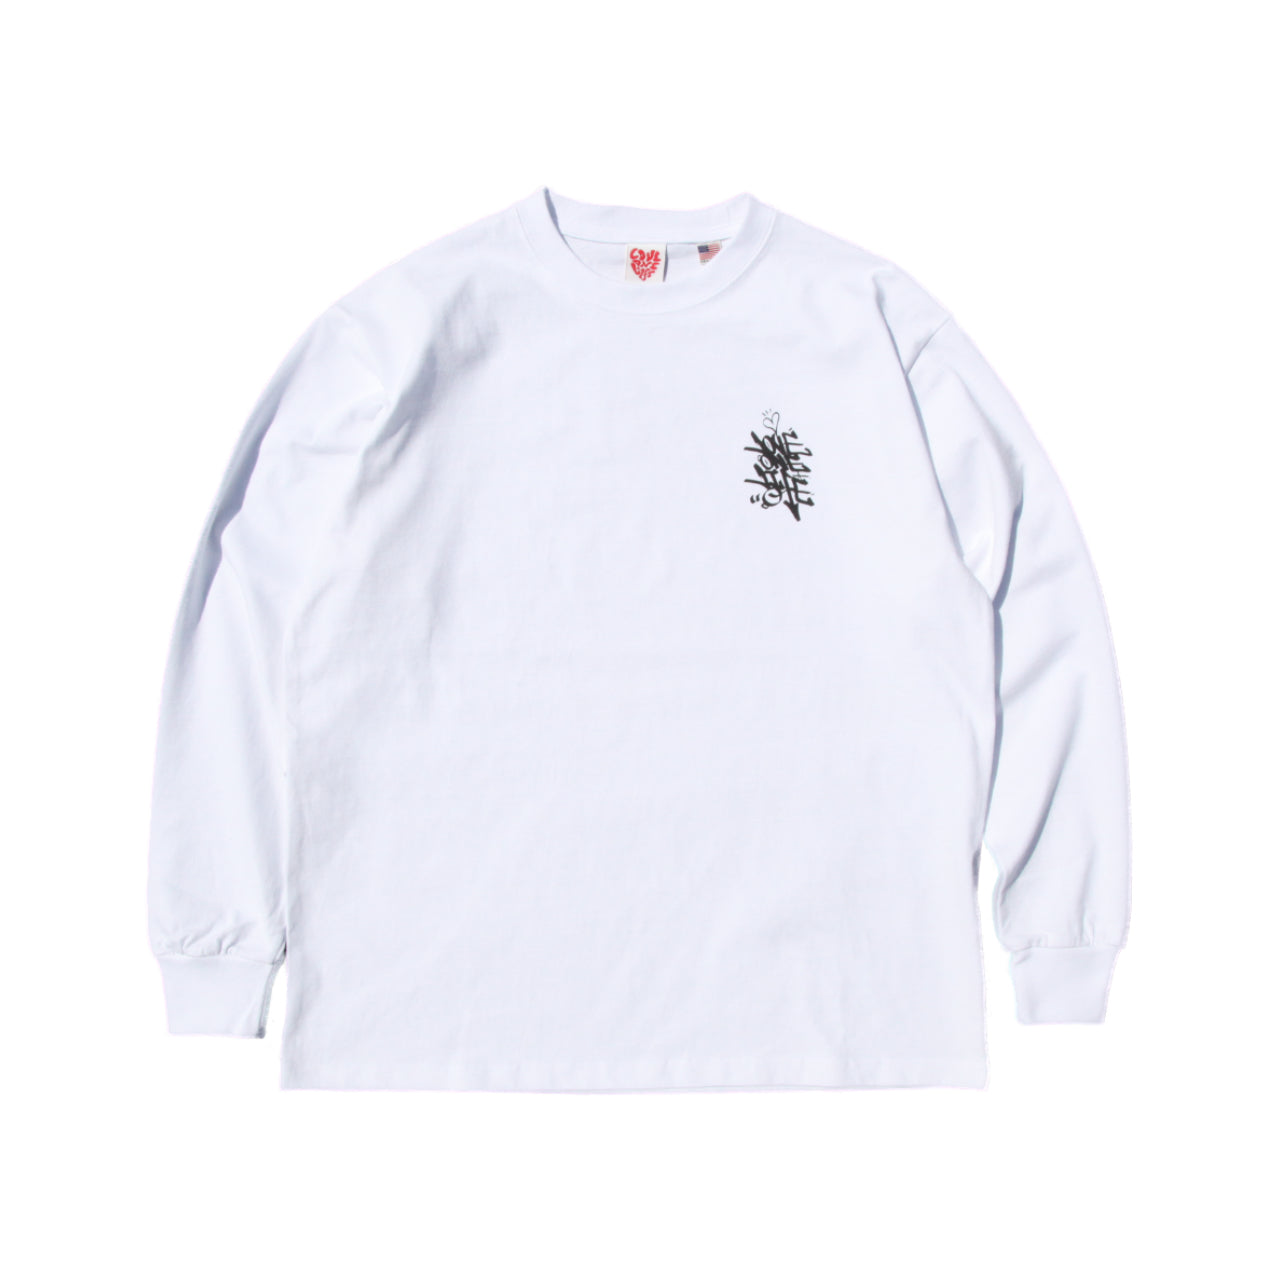 better soul tagging LS tee in white